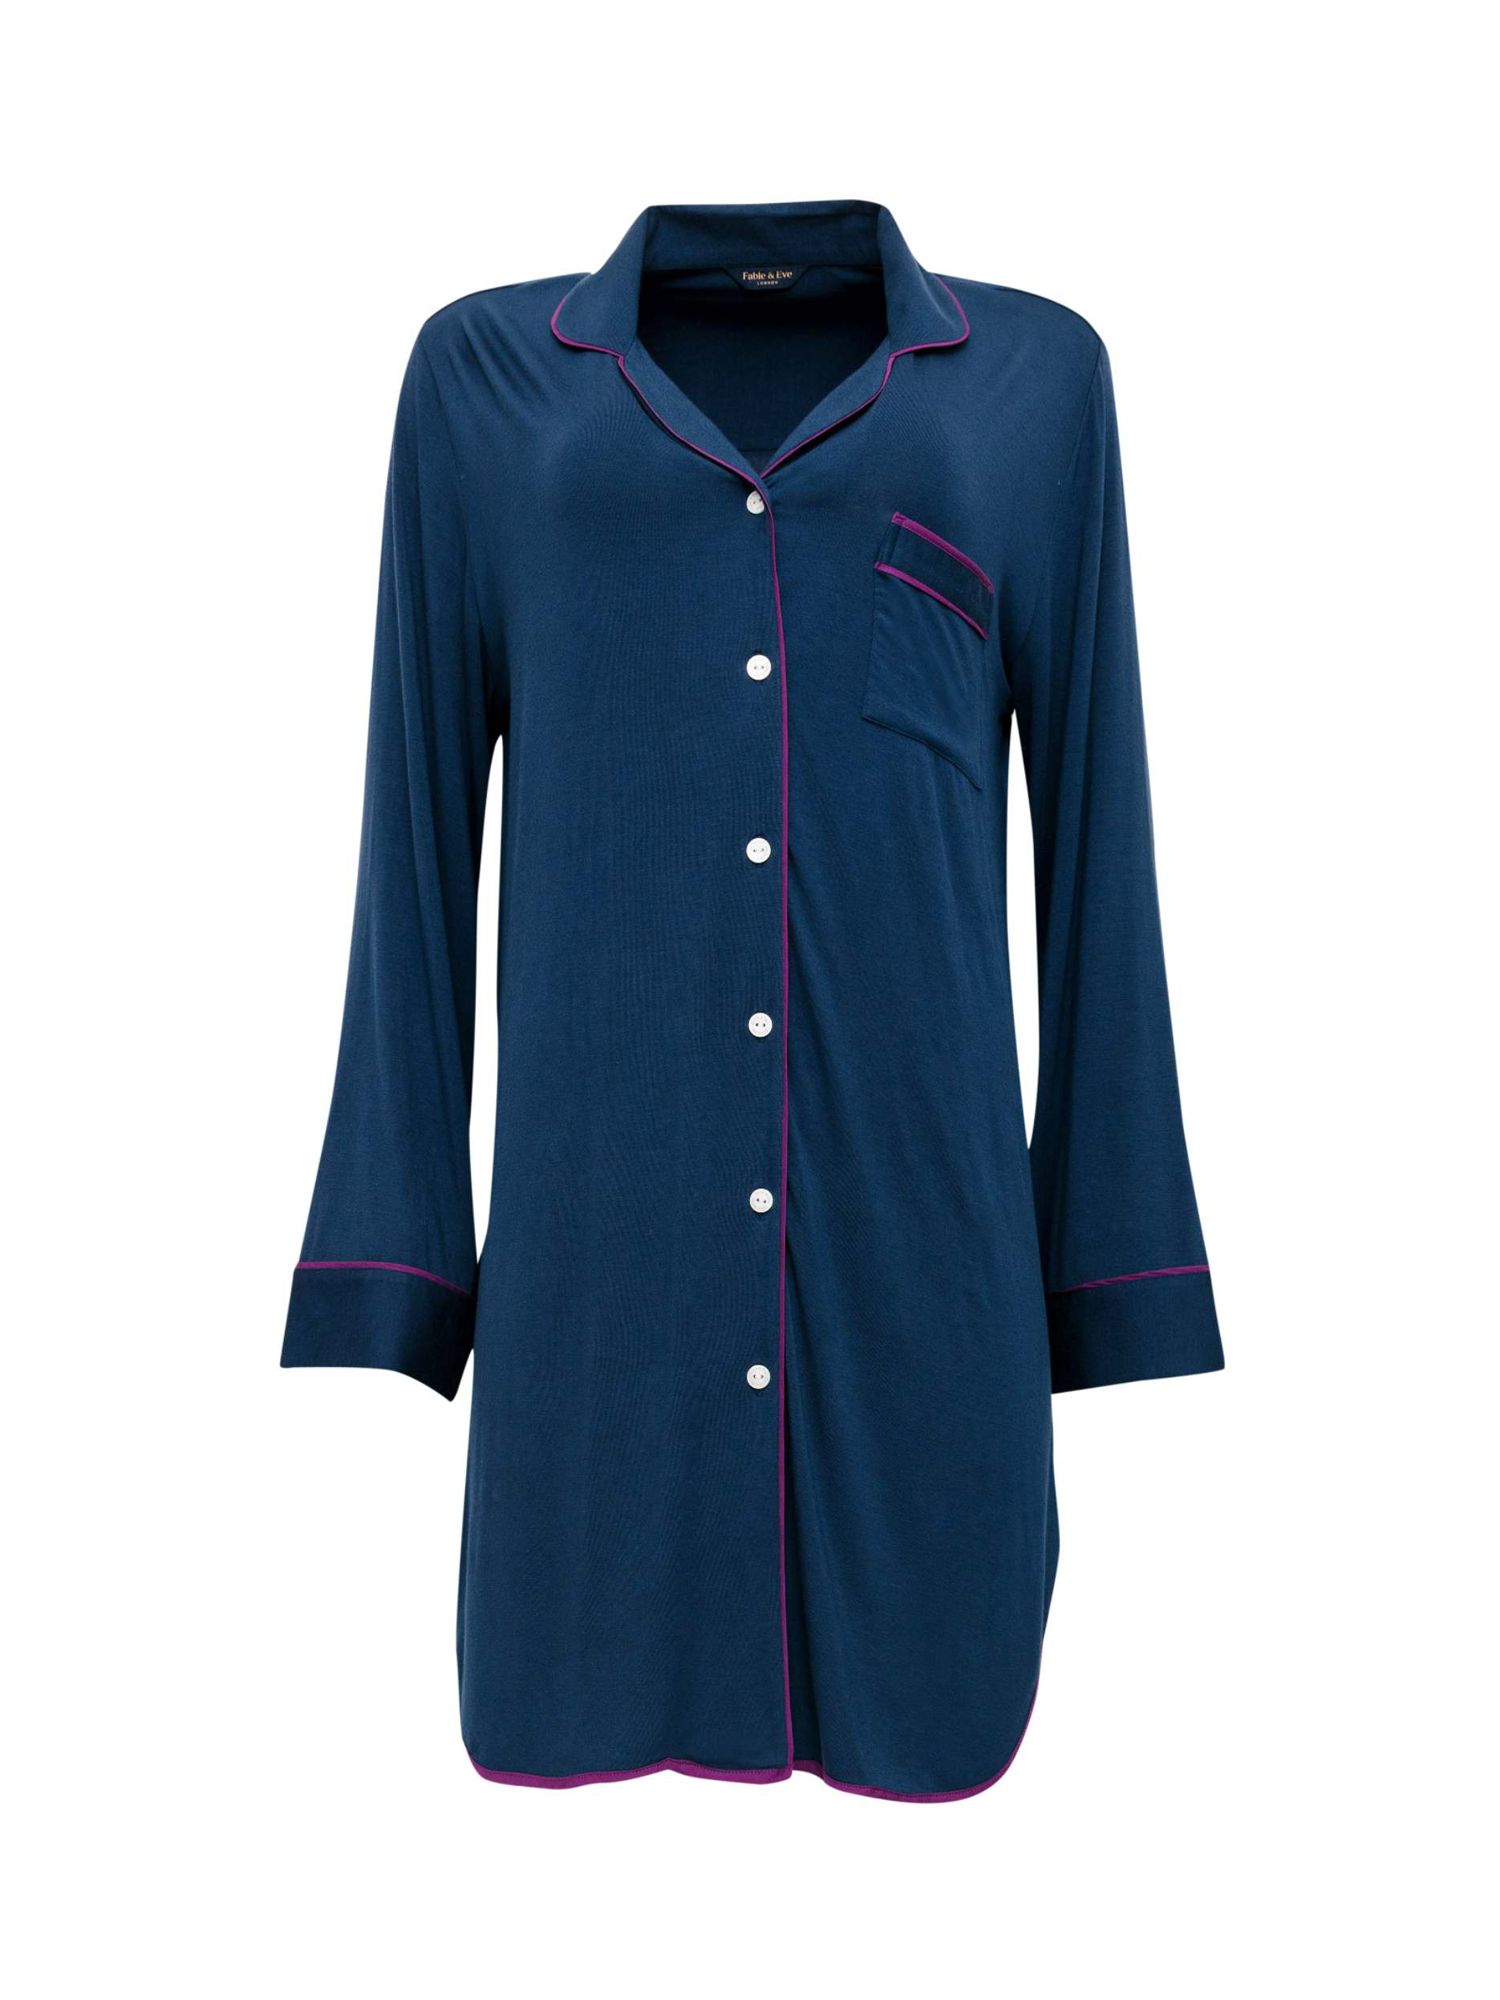 Buy Fable & Eve Southbank Knitted Long Sleeve Nightshirt, Navy Online at johnlewis.com